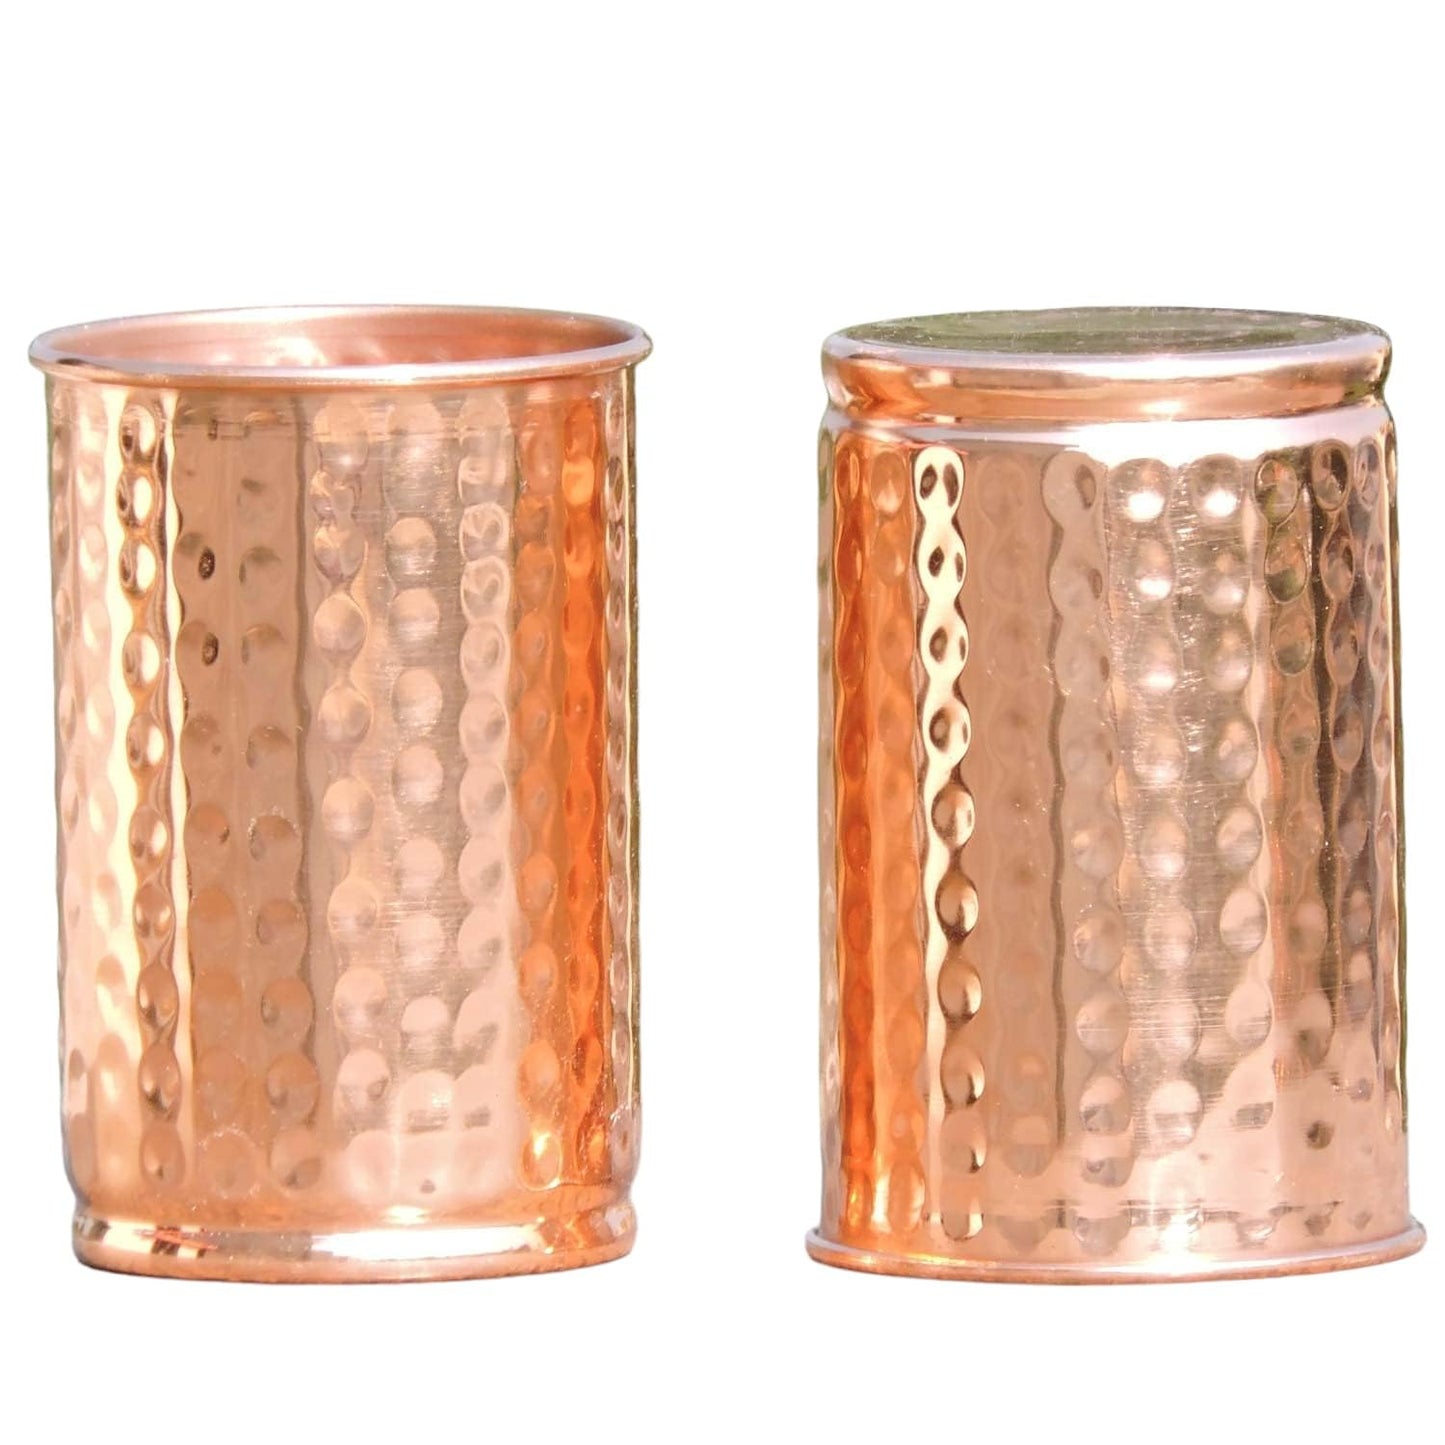 Hammered Copper Drinking Water Tumbler - 300 ml Capacity-pack of 2